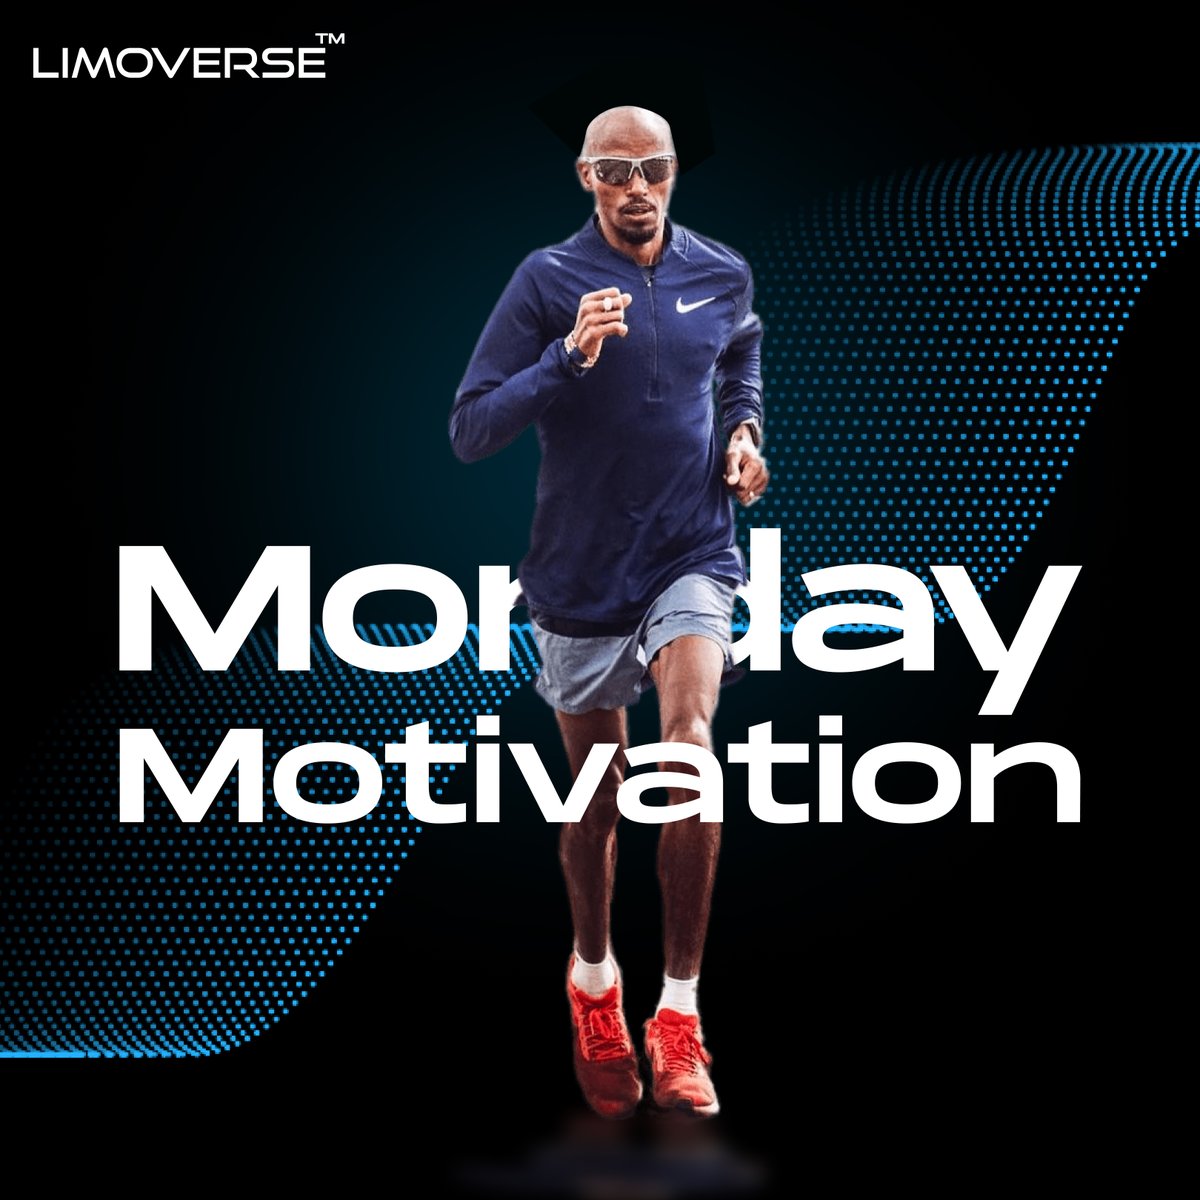 Monday Motivation 😉

From war-torn Somalia to the Olympic podium, Mo Farah's journey is one of perseverance and grit. 🥇🏃‍♂️
His determination to overcome adversity and become a champion is a true inspiration.

#RealRunners #MoFarah #Limoverse